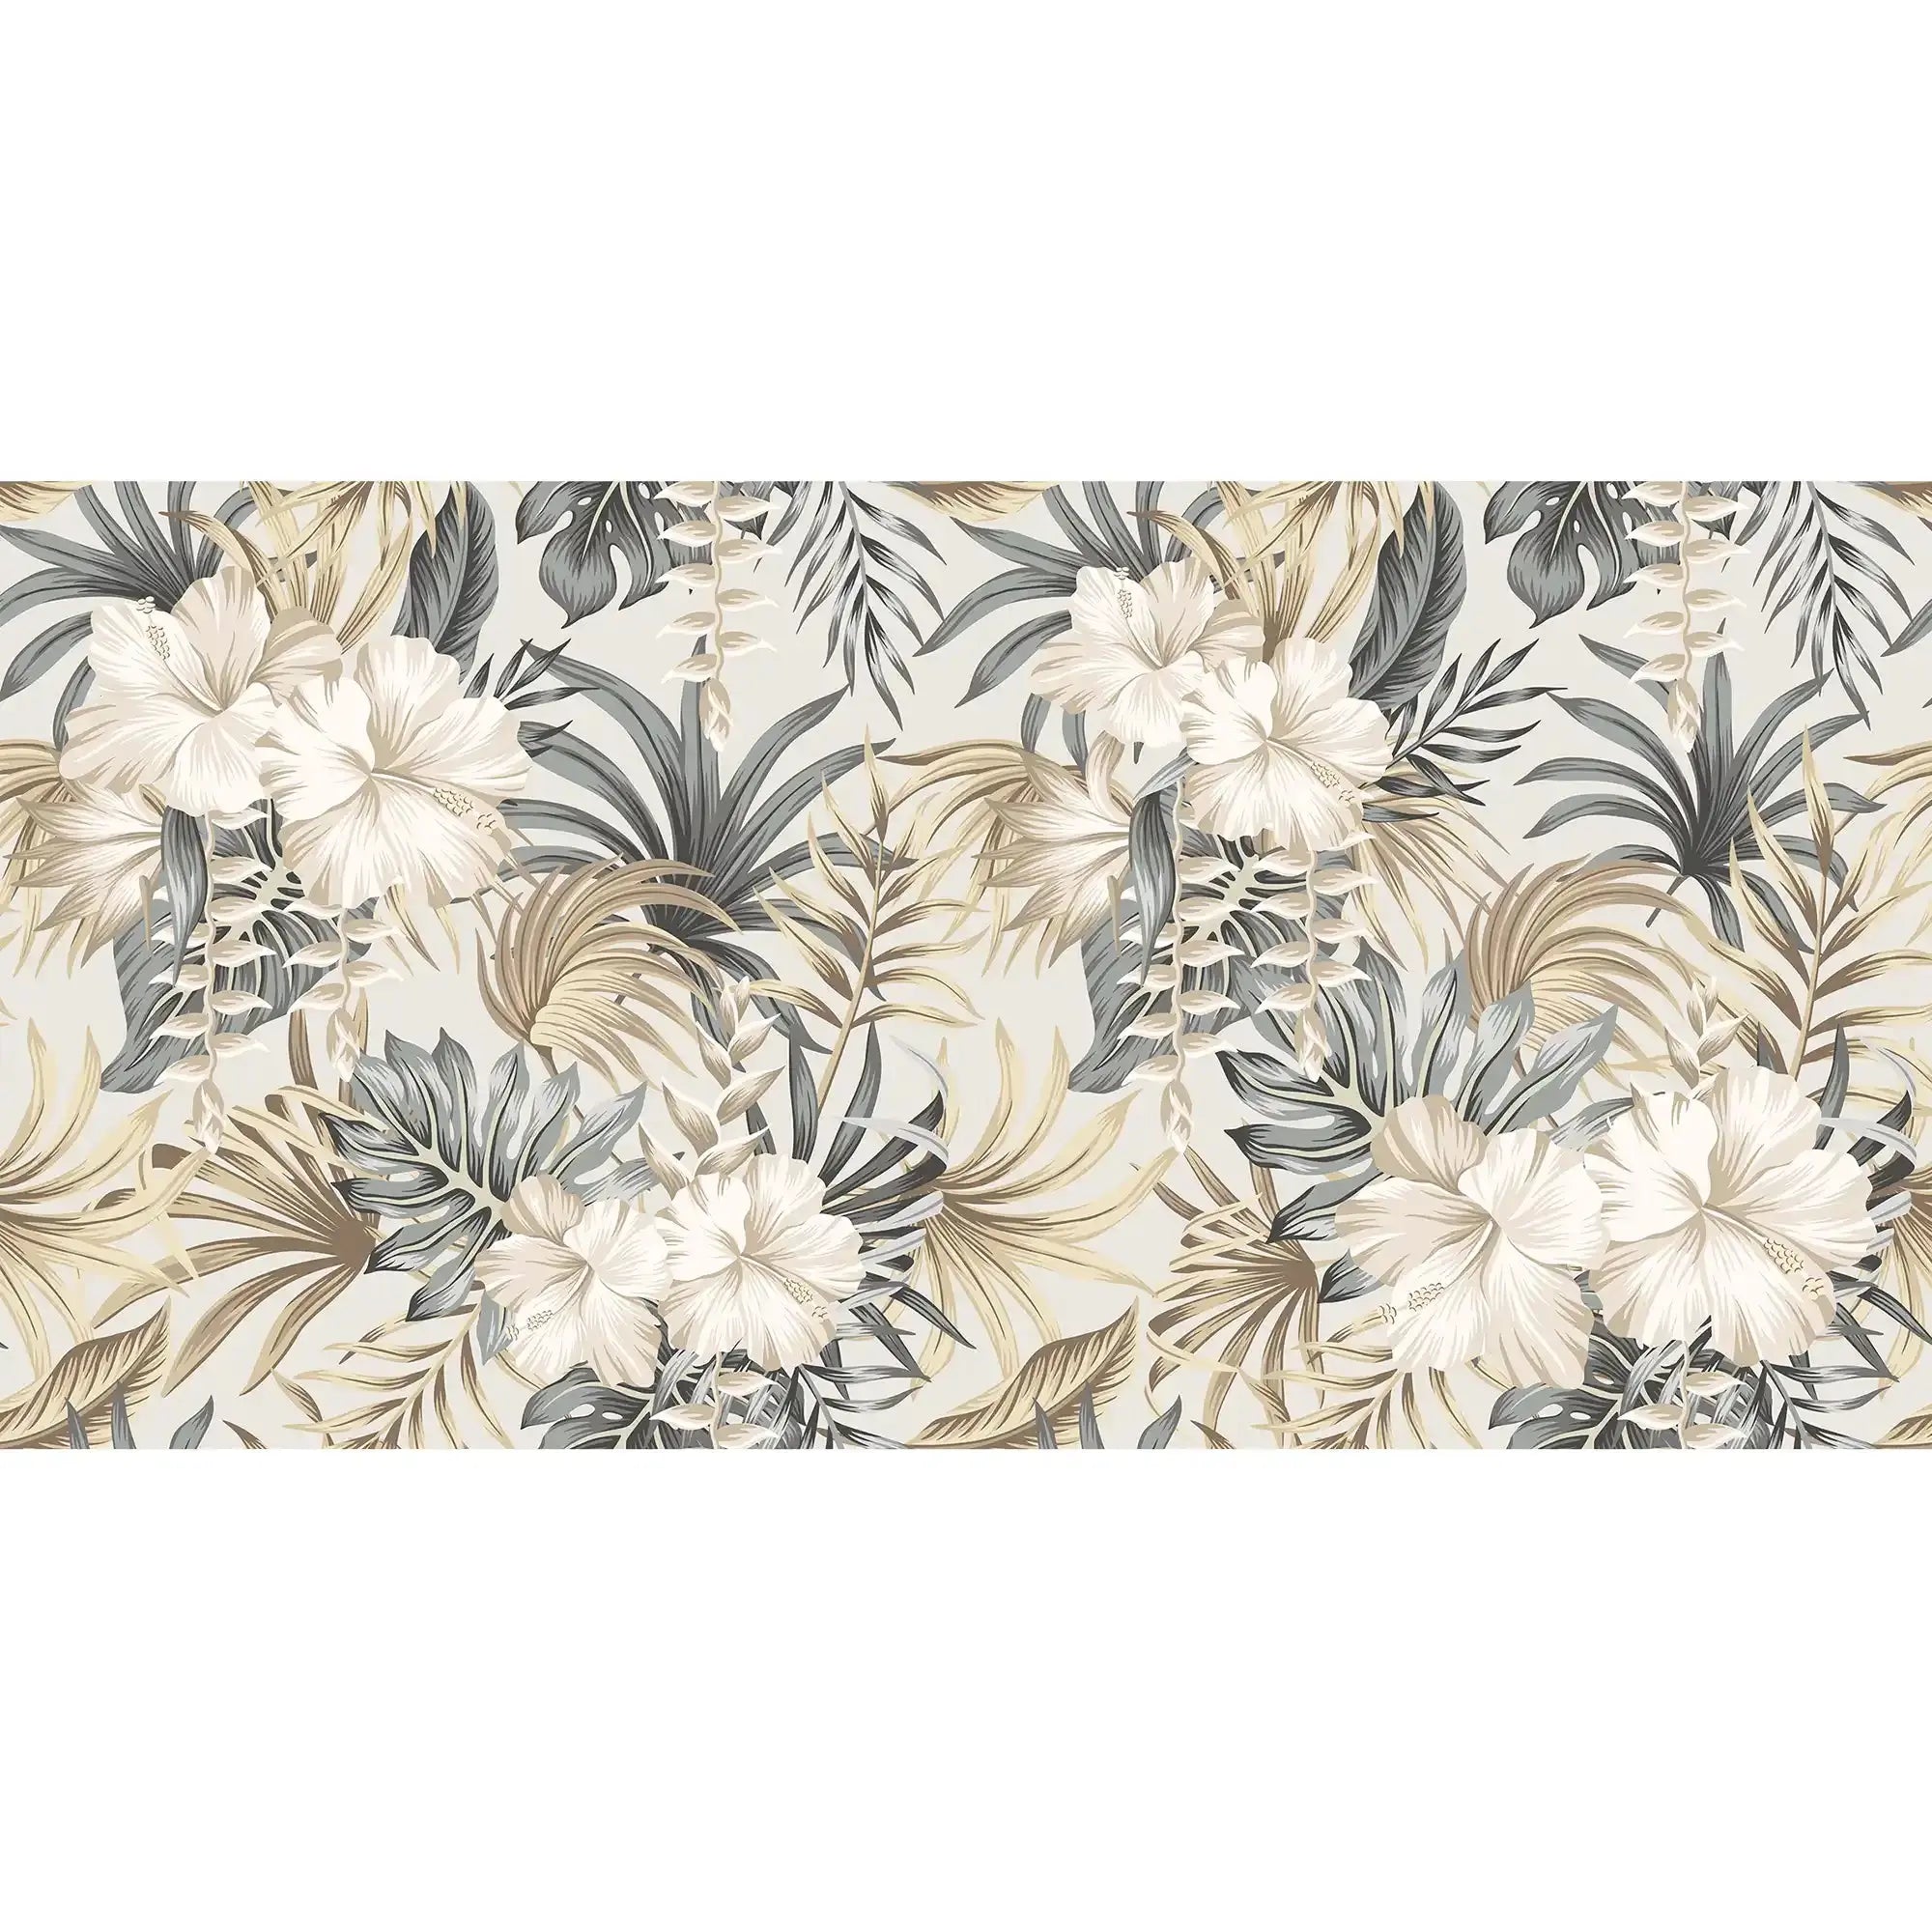 3099-E / Contemporary Floral Peel and Stick Wallpaper, Trendy Tropical Pattern, Adhesive Wall Paper, Easy Installation for Kitchen, Bedroom, Bathroom - Artevella